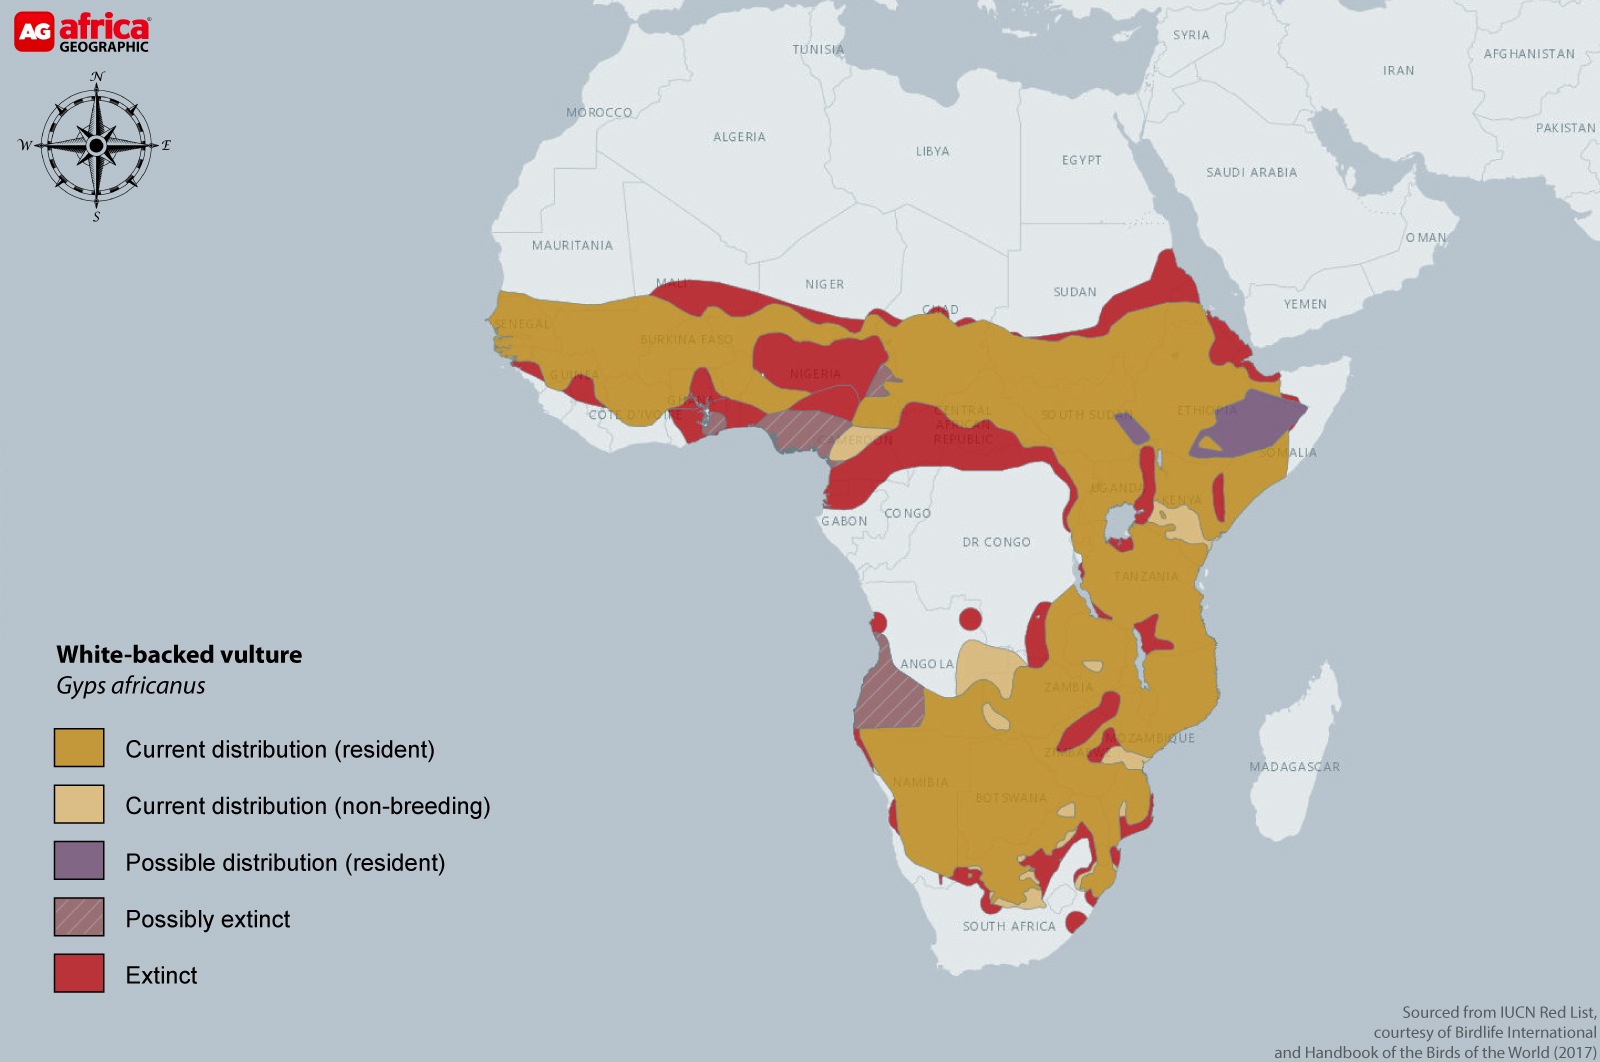 Distribution map of white-backed vulture